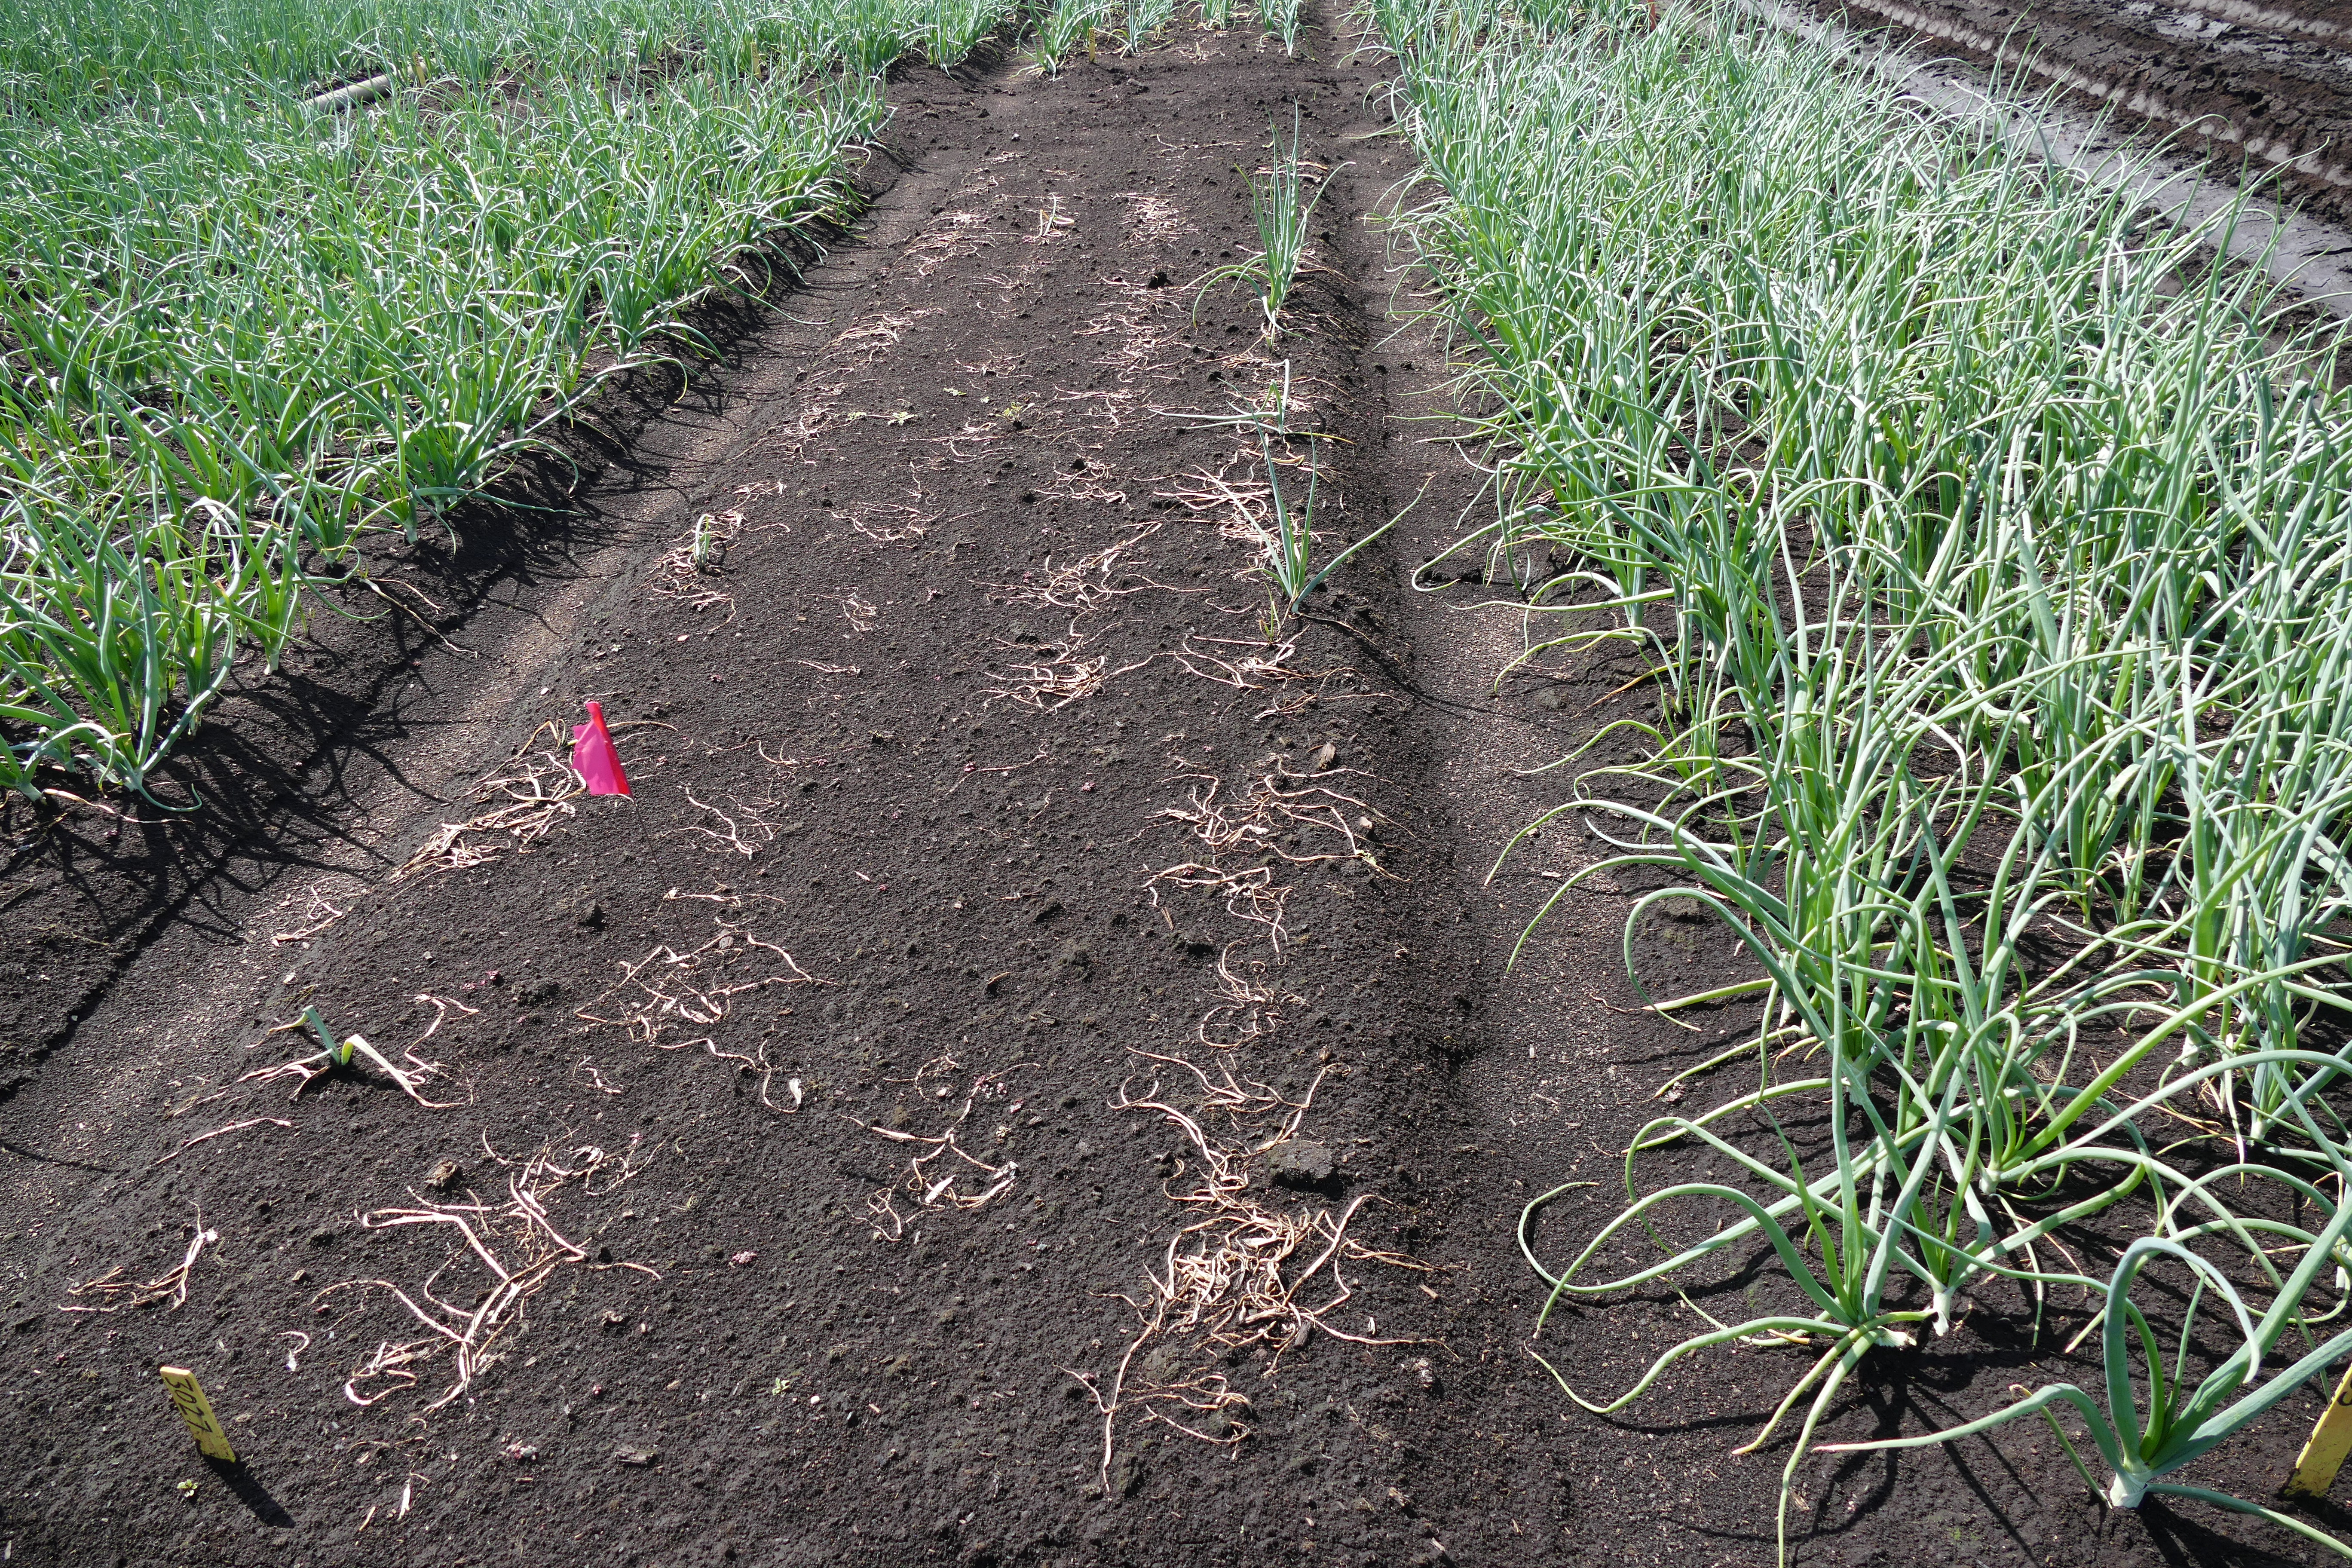 Plots of onion crops with the middle plot being just soil and no onions